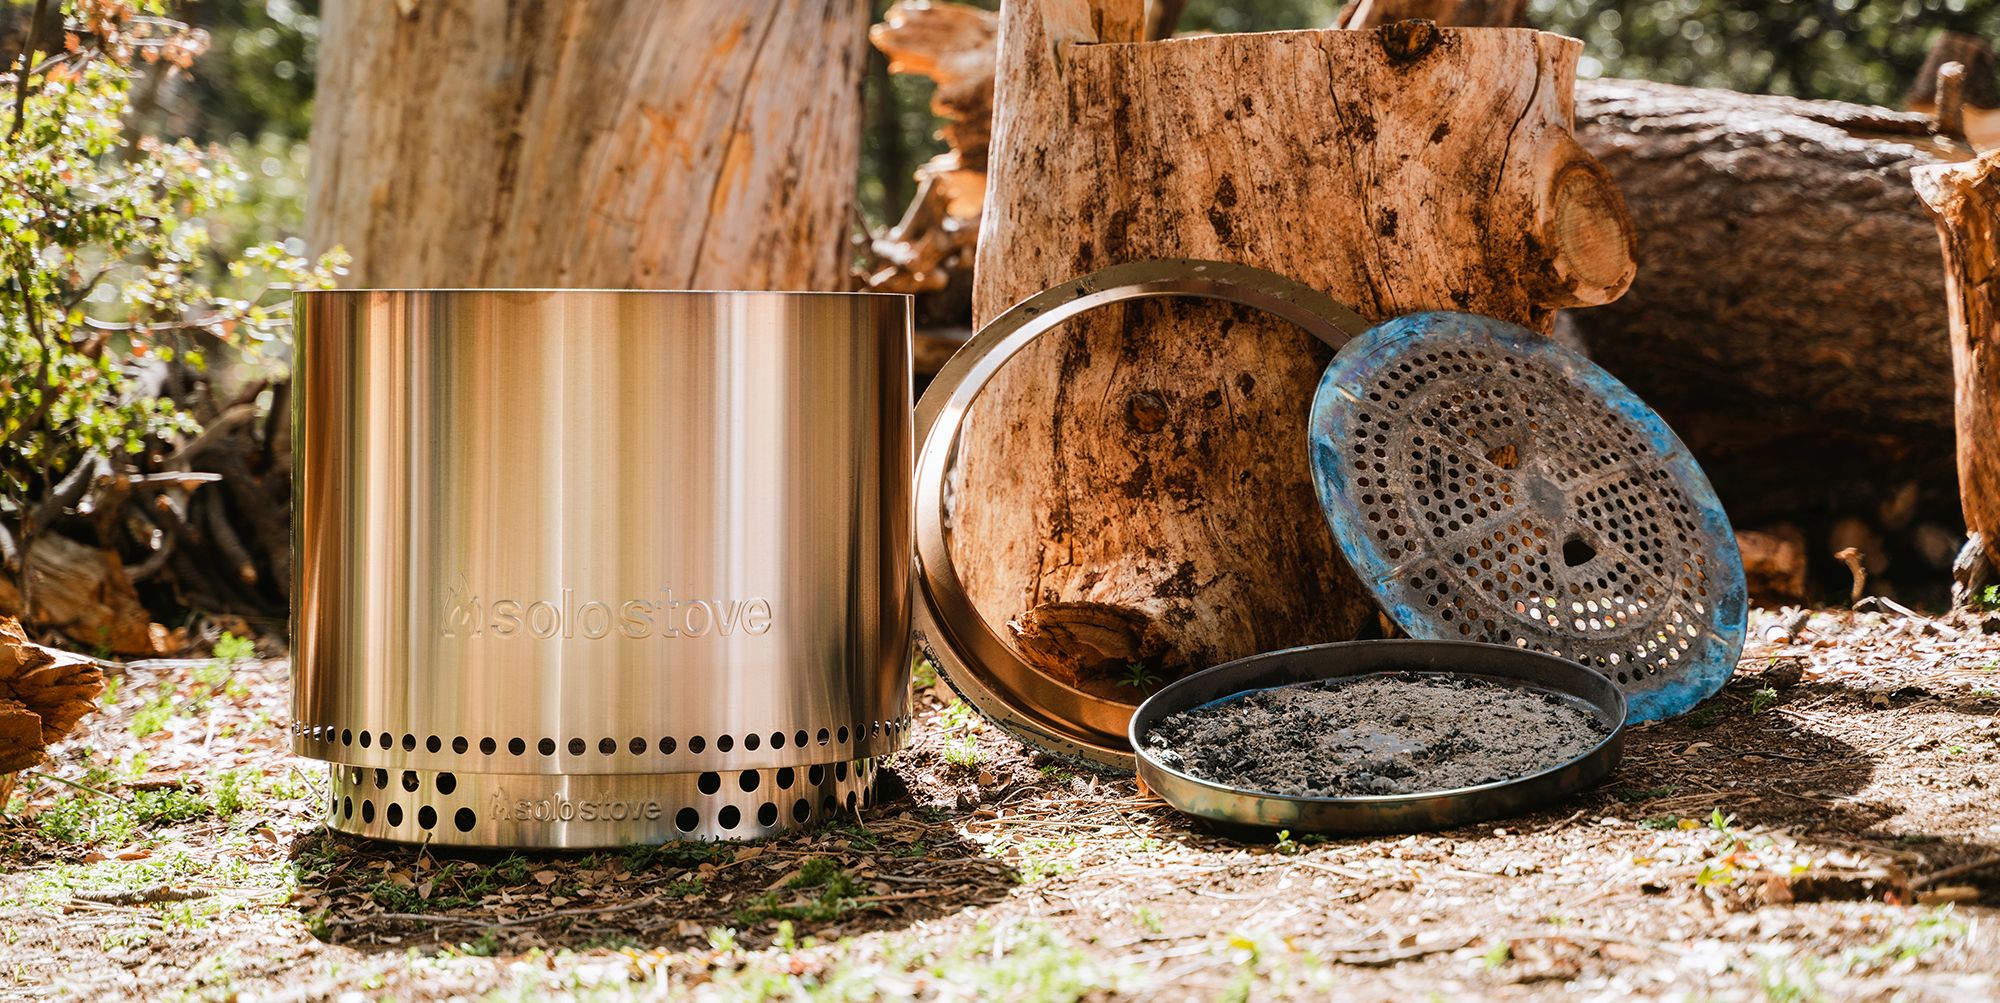 Solo Stove Just Launched the 2.0 Fire Pit With Removable Ash Tray